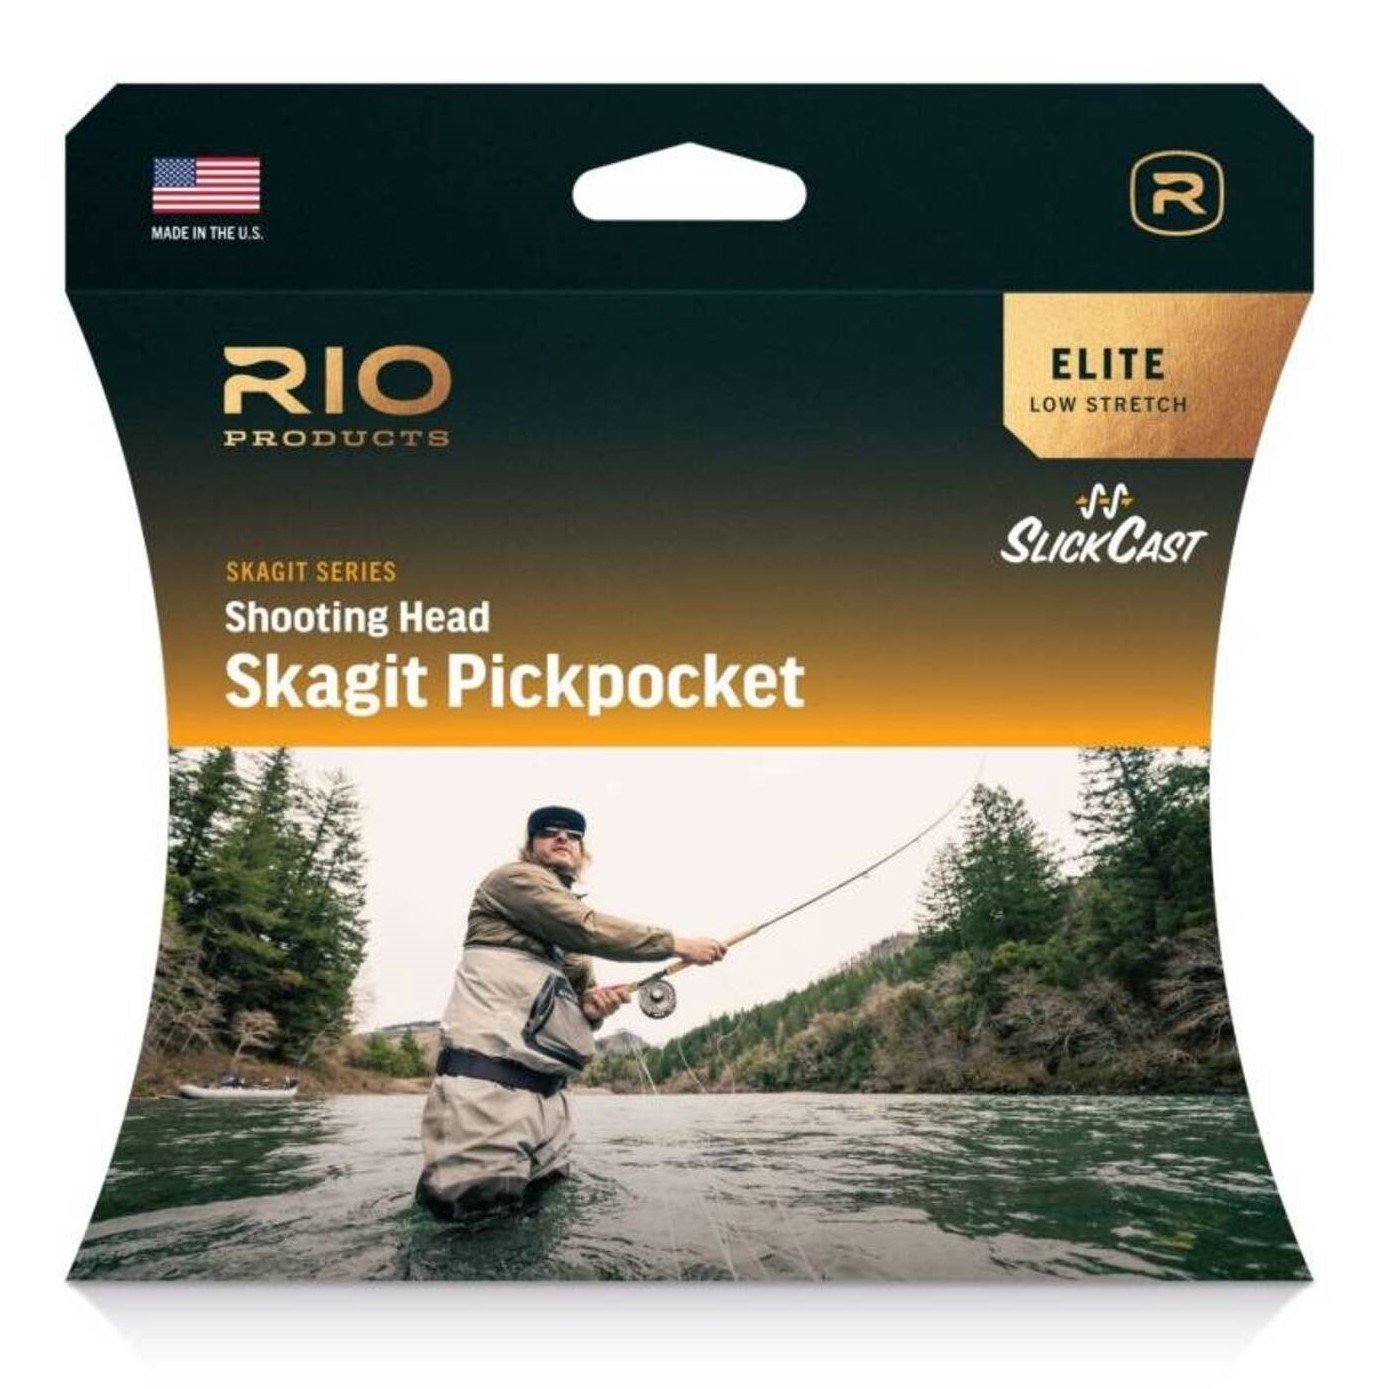 Fly Fishing Accessories- Dr. Slick, Sage, Simms, and more! — Red's